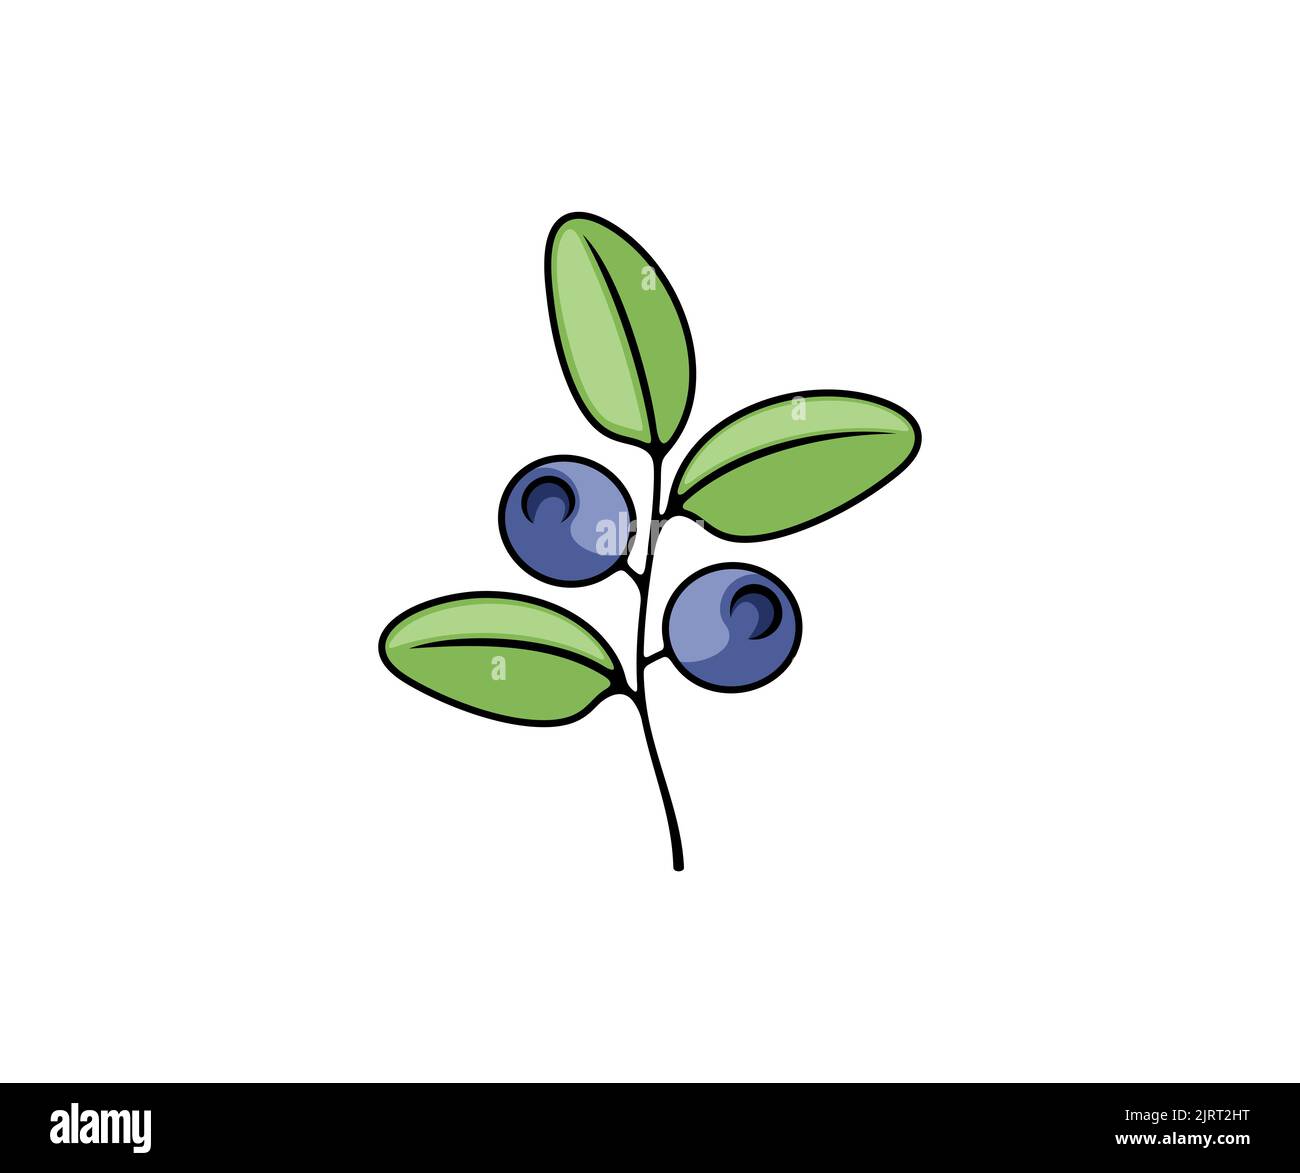 Blueberry, berries, vector design and illustration. Bilberry, huckleberry, whortleberry, food and nature Stock Vector